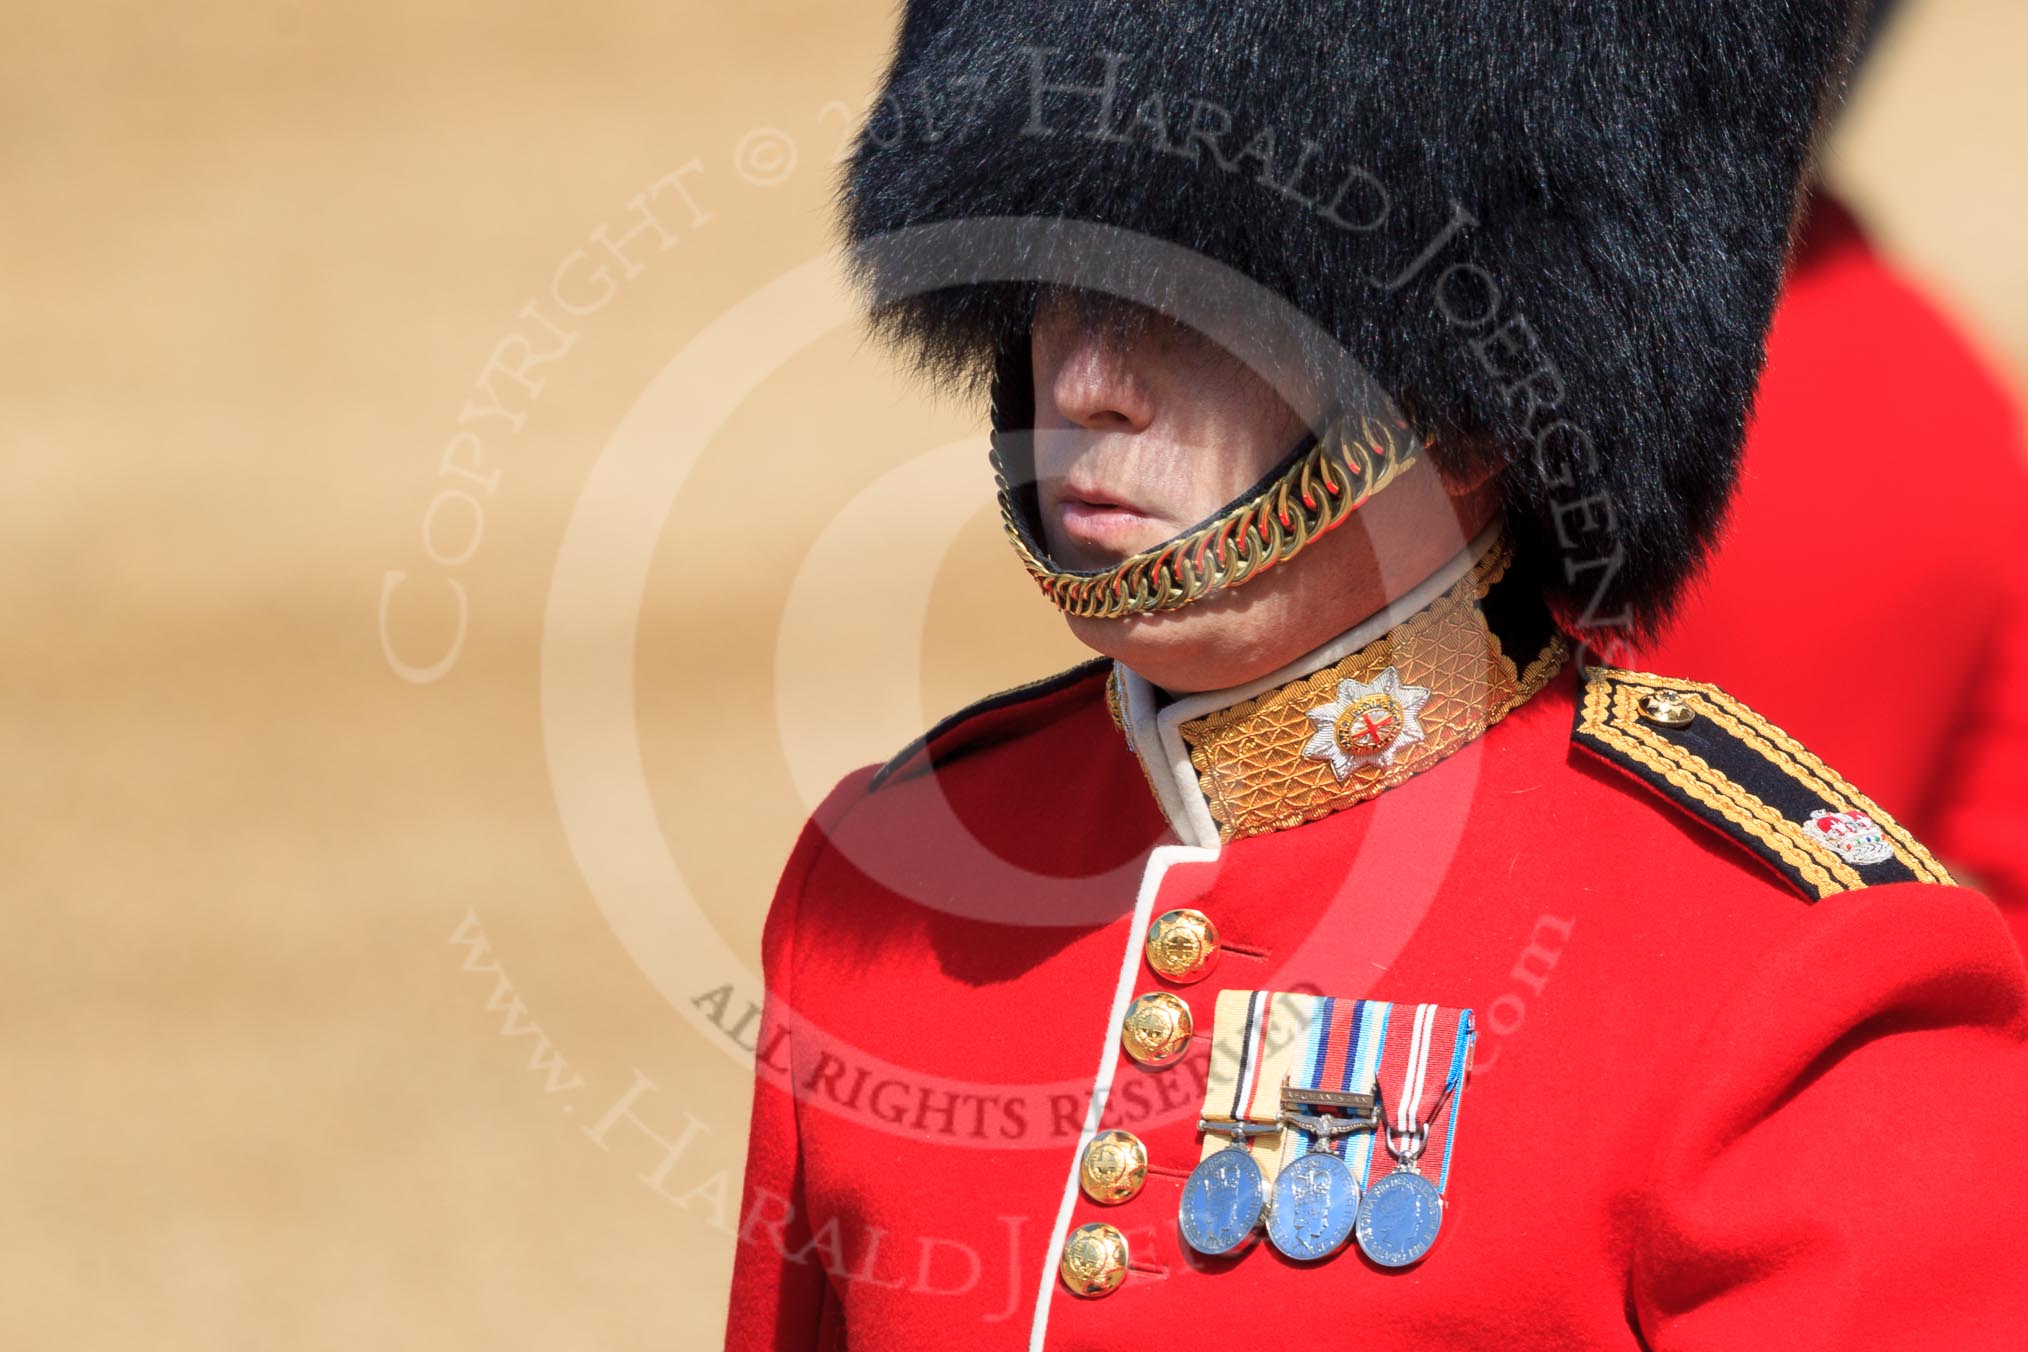 The Parade Major, Major OJ Biggs, riding out onto Horse Guards Parade, during Trooping the Colour 2018, The Queen's Birthday Parade at Horse Guards Parade, Westminster, London, 9 June 2018, 10:38.